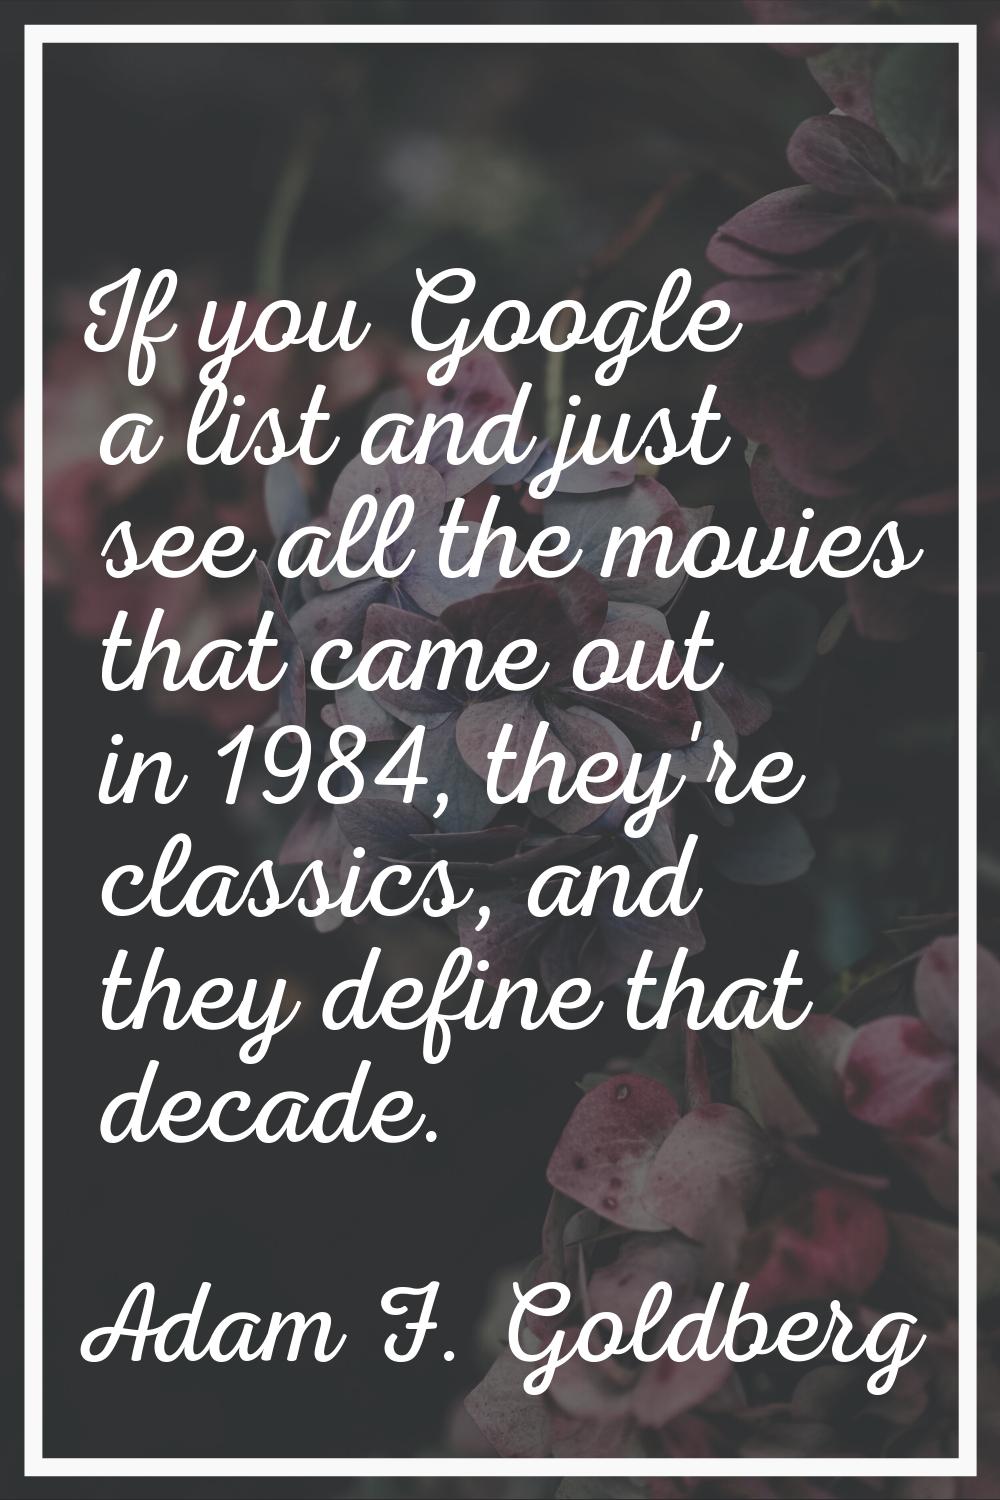 If you Google a list and just see all the movies that came out in 1984, they're classics, and they 